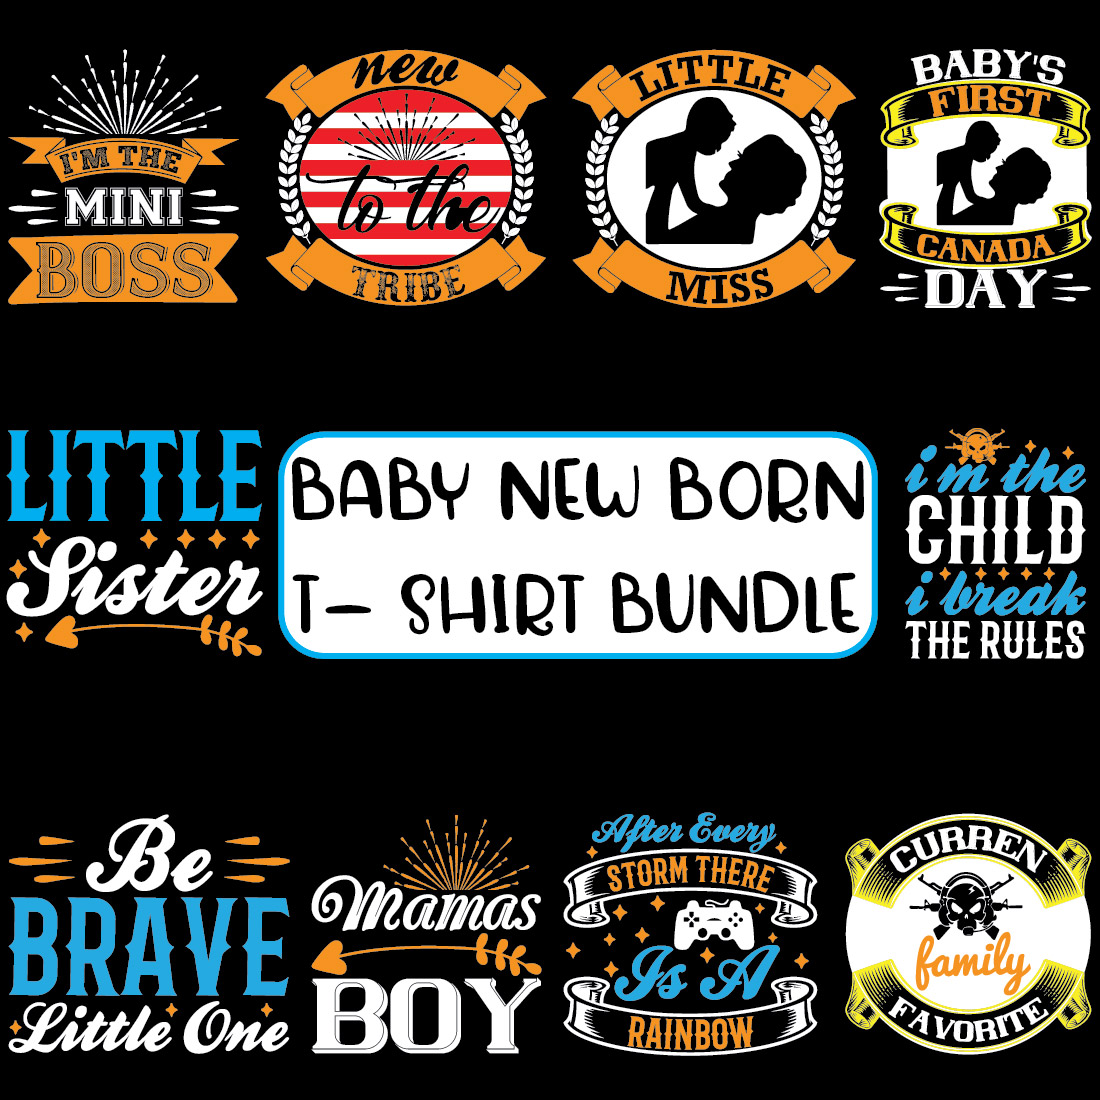 Baby New born T- Shirt Bundle preview image.